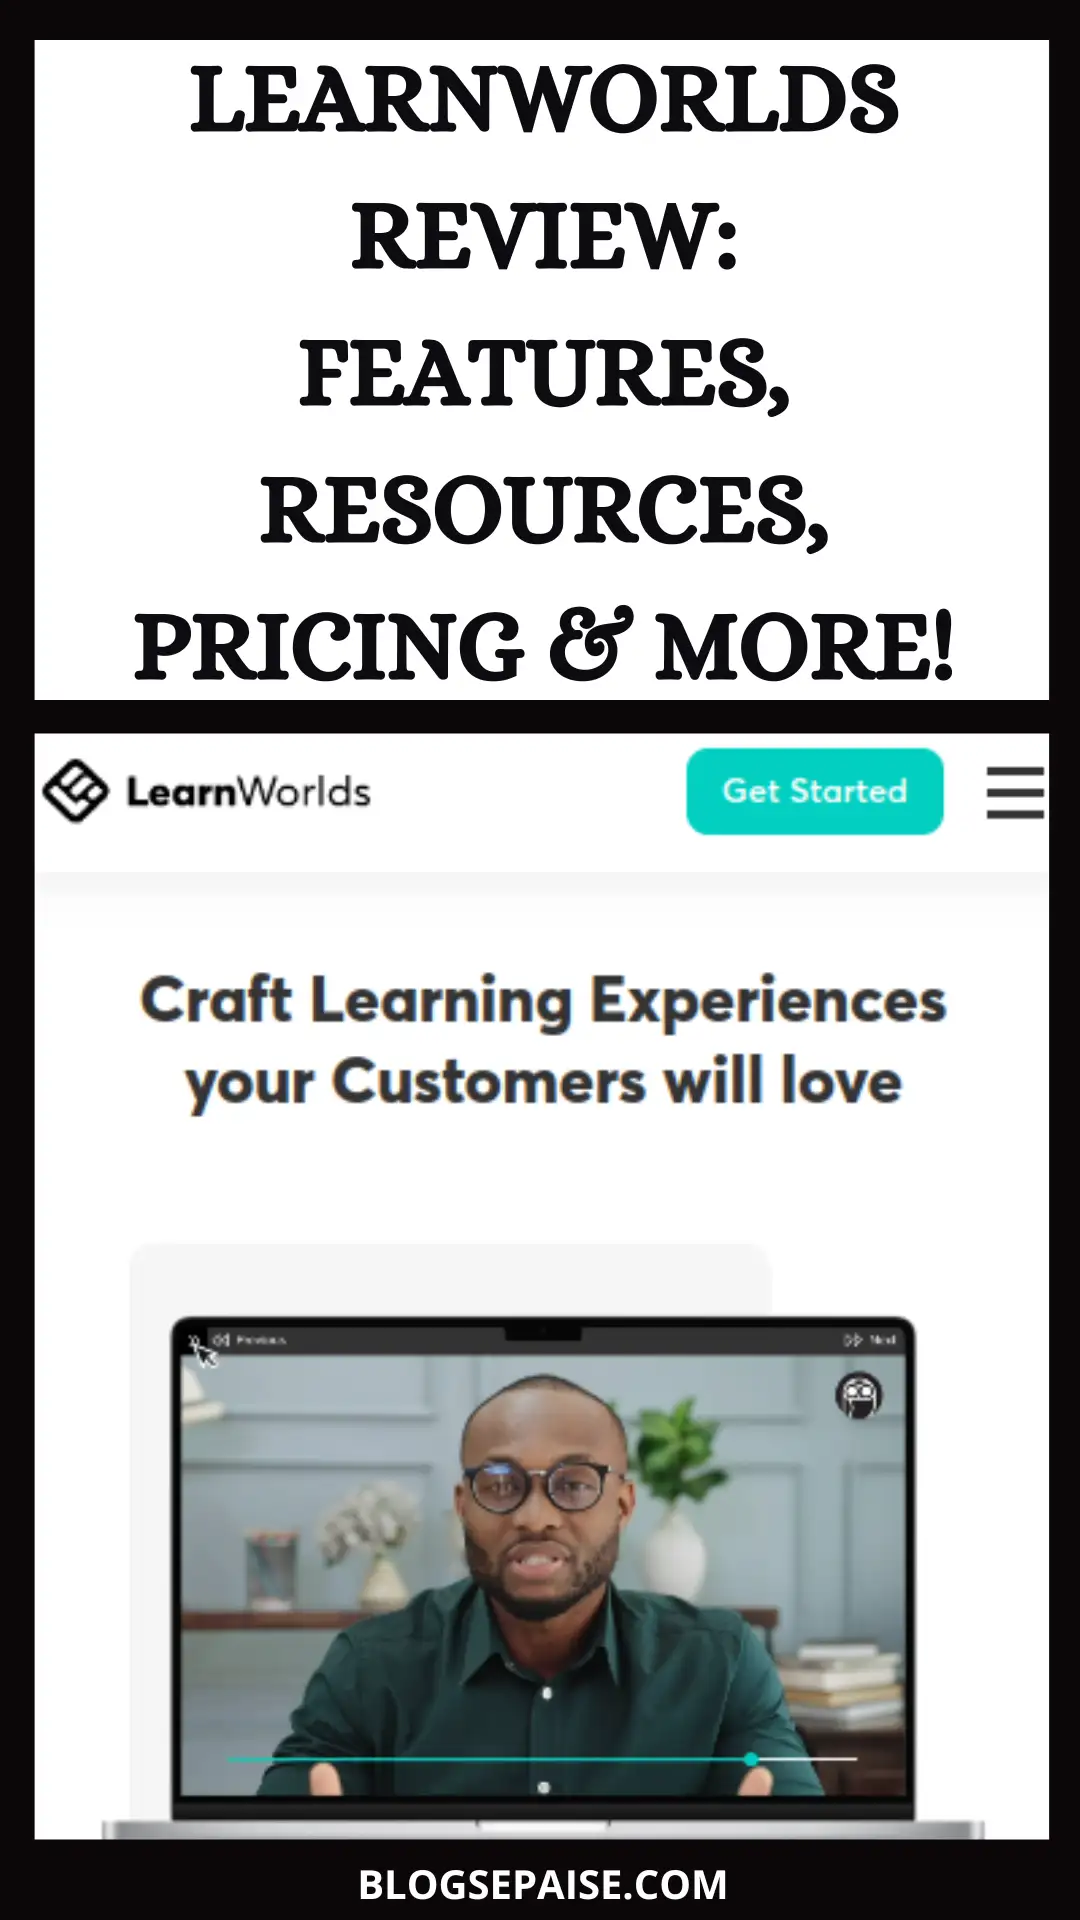 learnworlds-review-pin